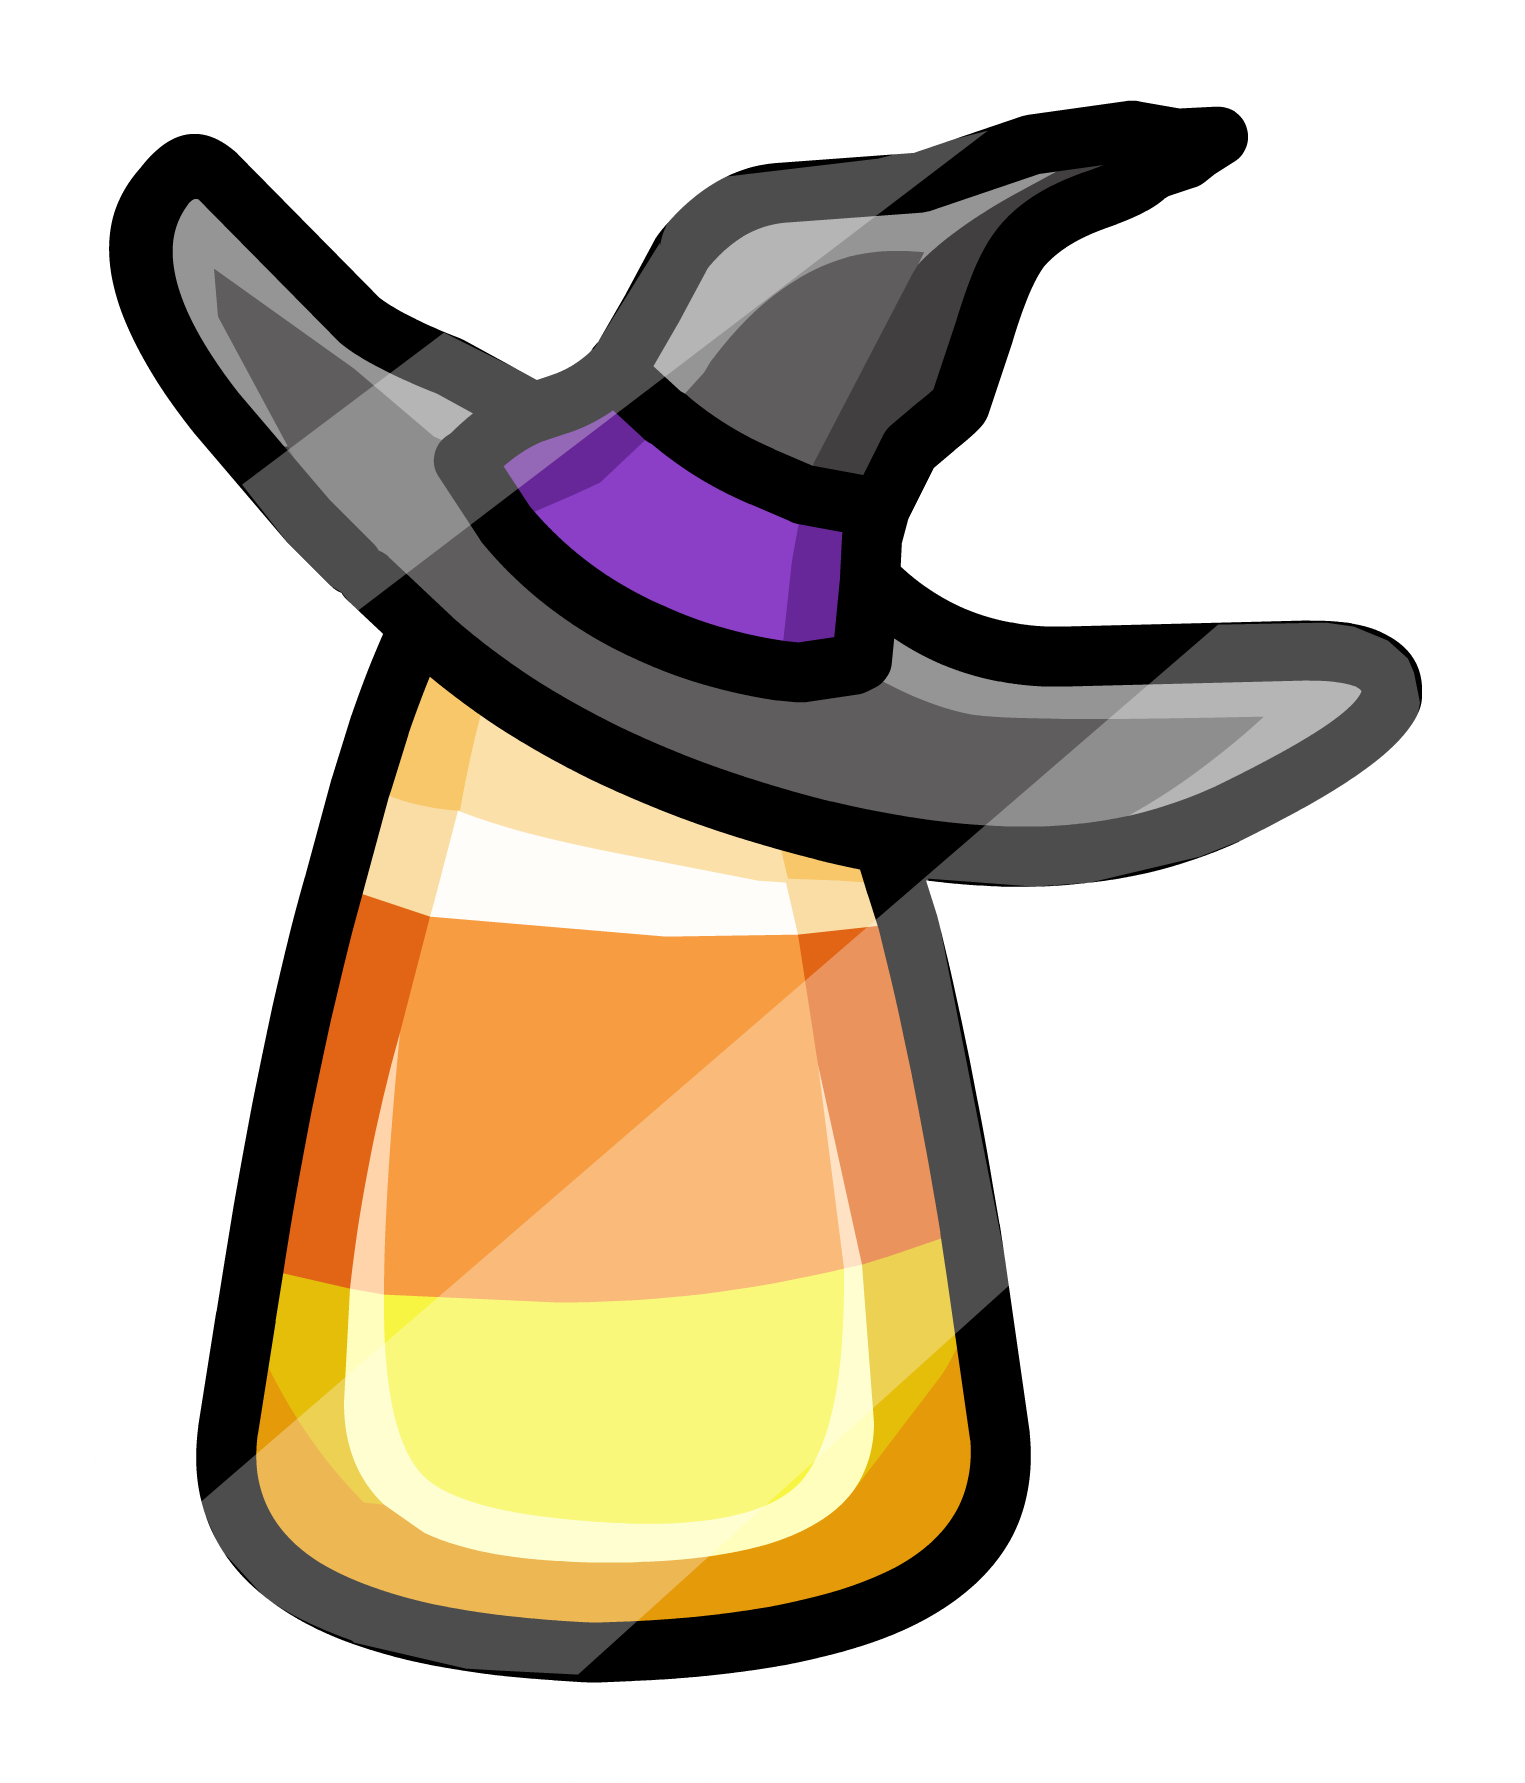 Candy Corn Potionwith Witch Hat PNG image